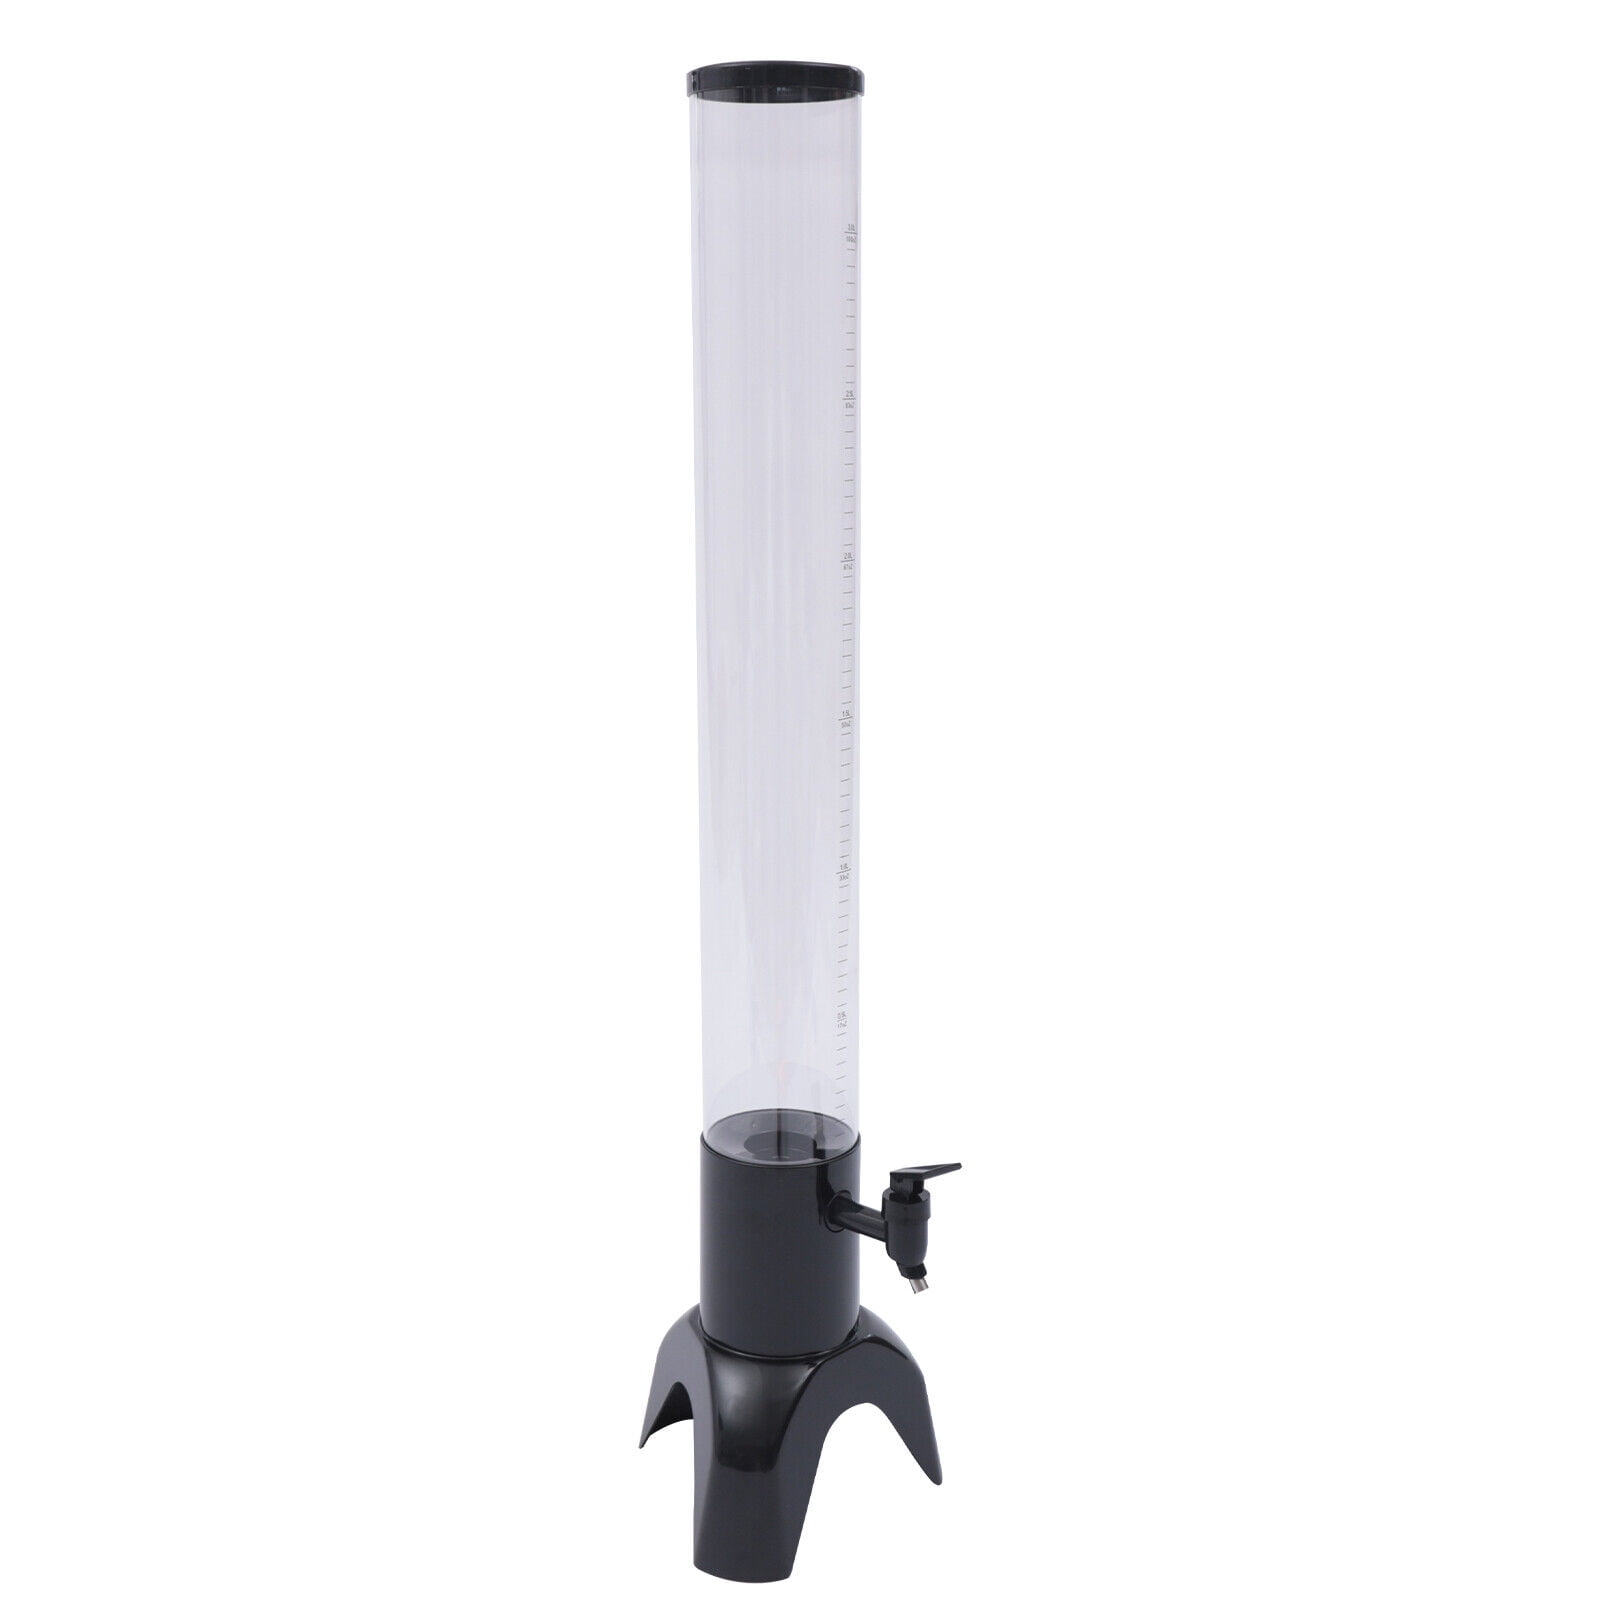 Beer Dispensers 3L Large Capacity Juice Margarita Tower Clear Beverage  Tower Dispenser for Holiday Bars BBQ